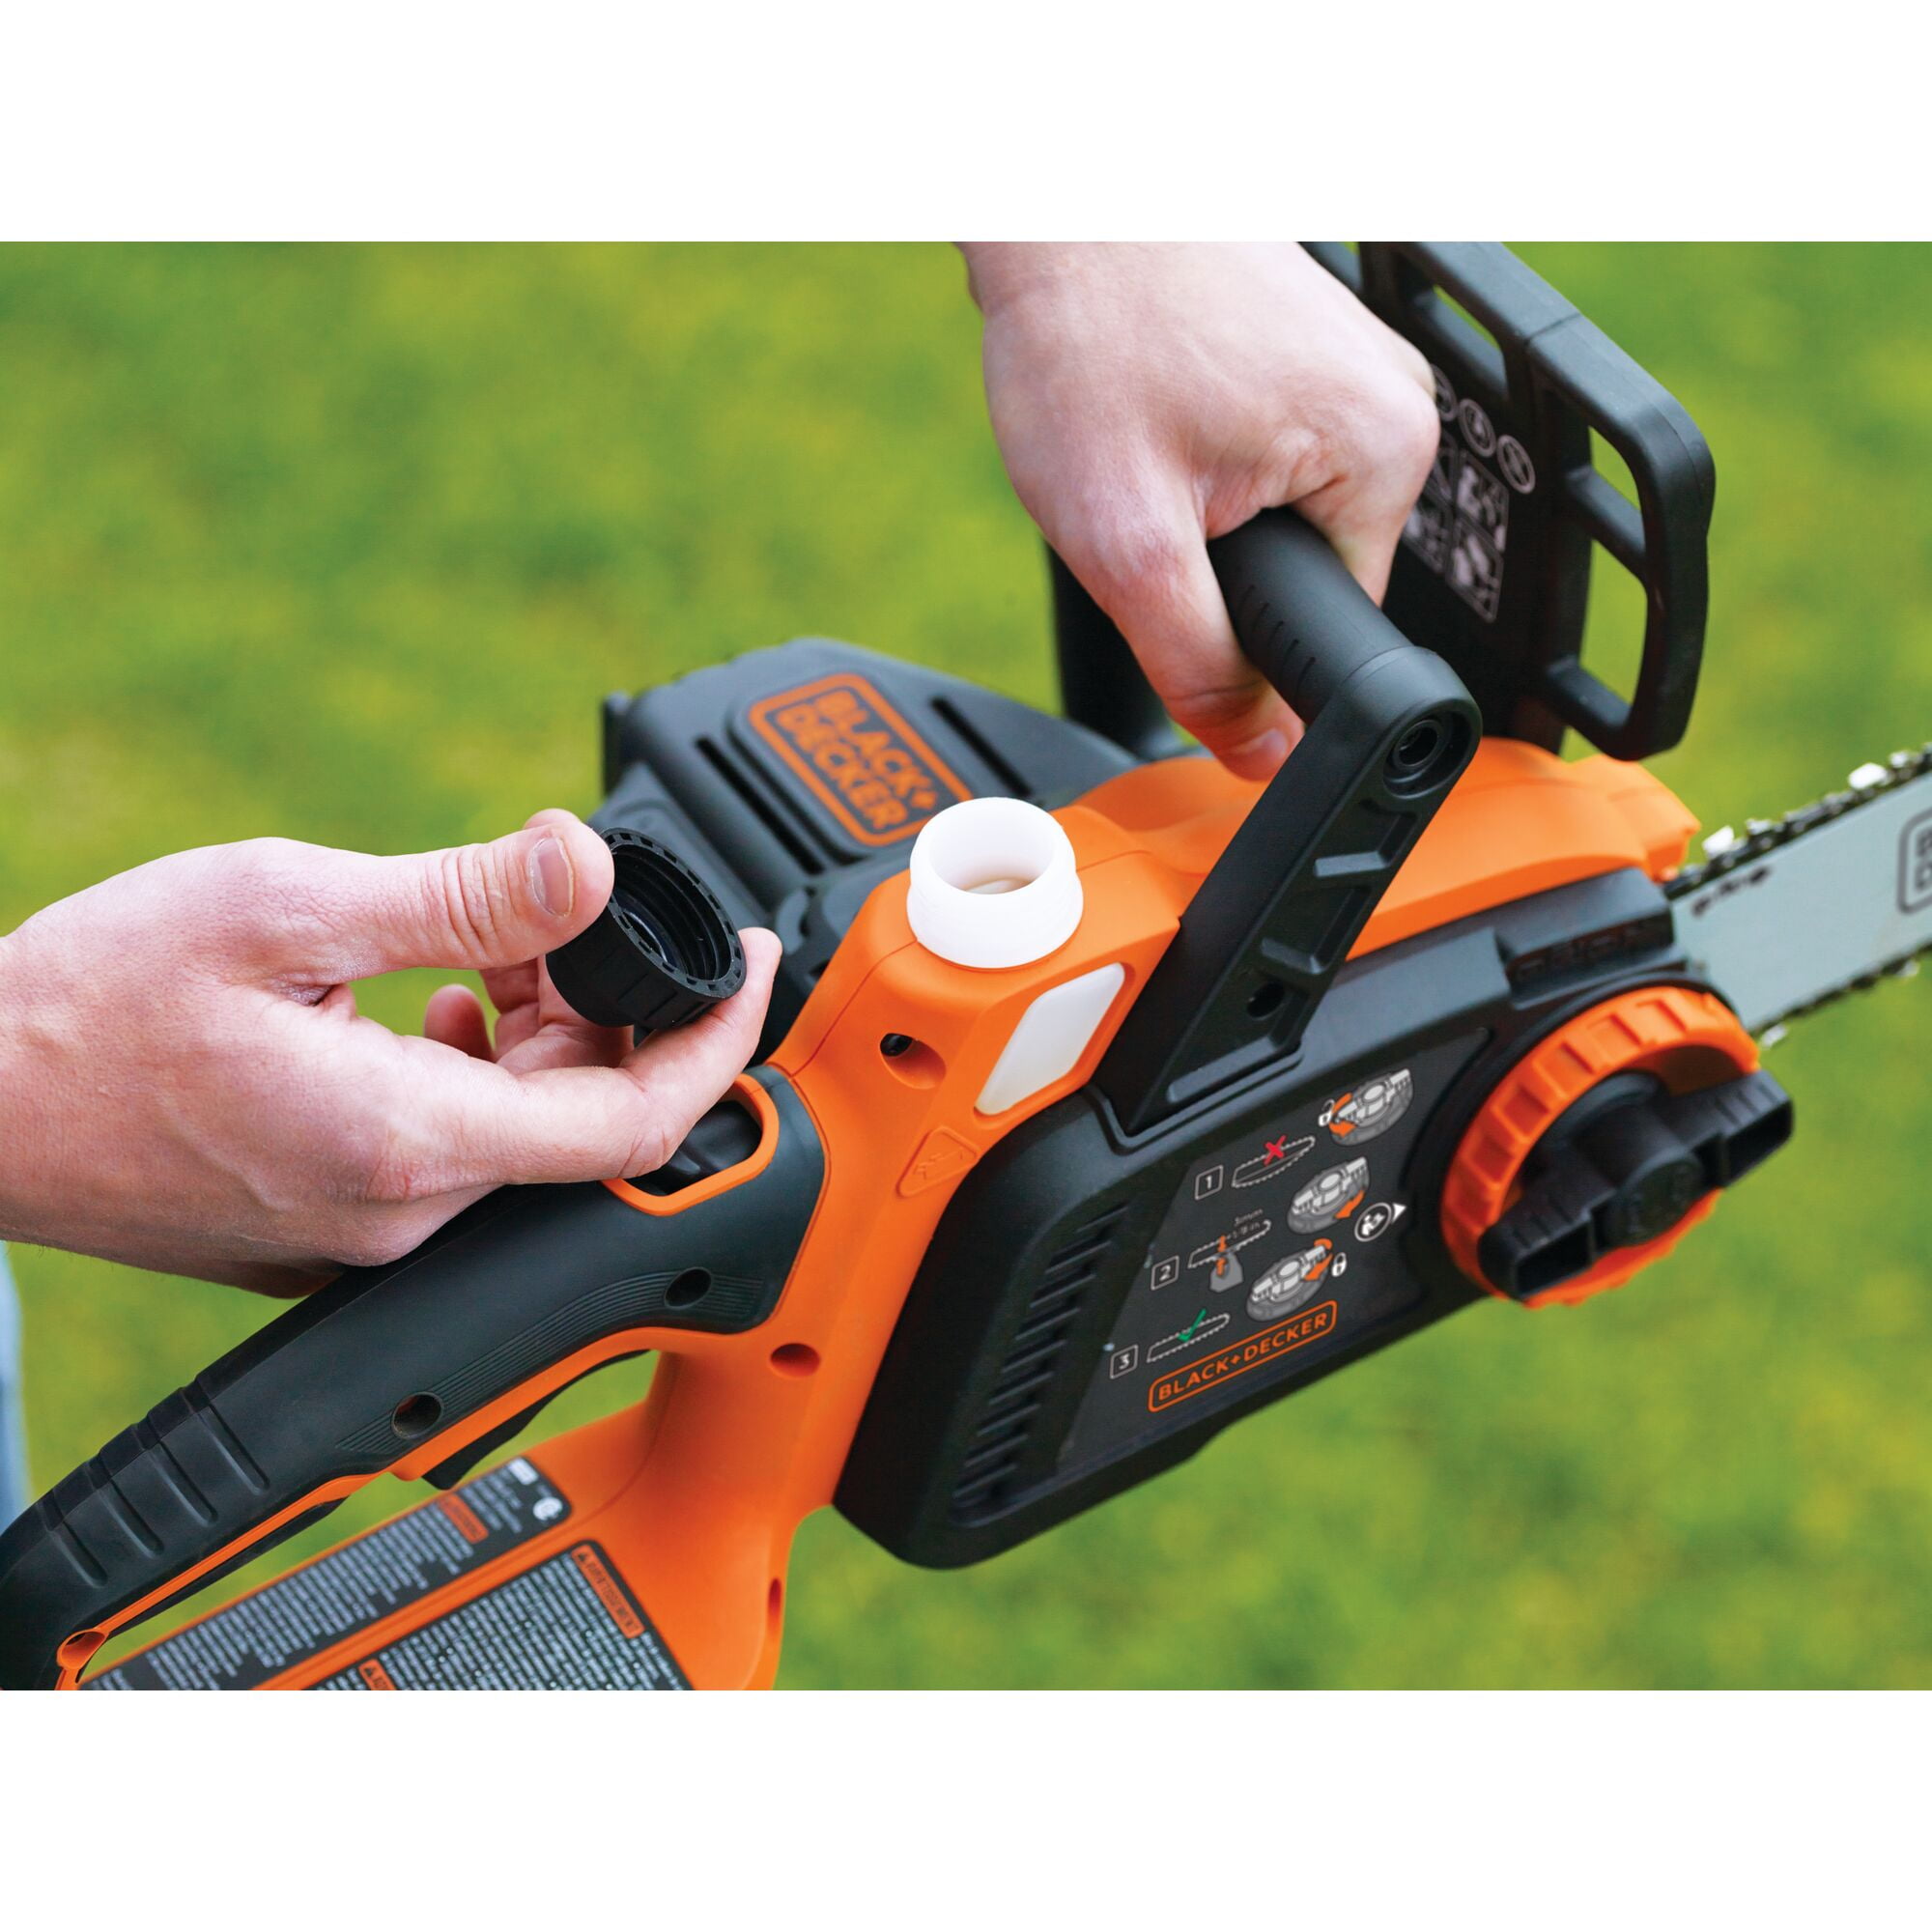 Black and Decker LCS120 20V Lithium Cordless Chain Saw 